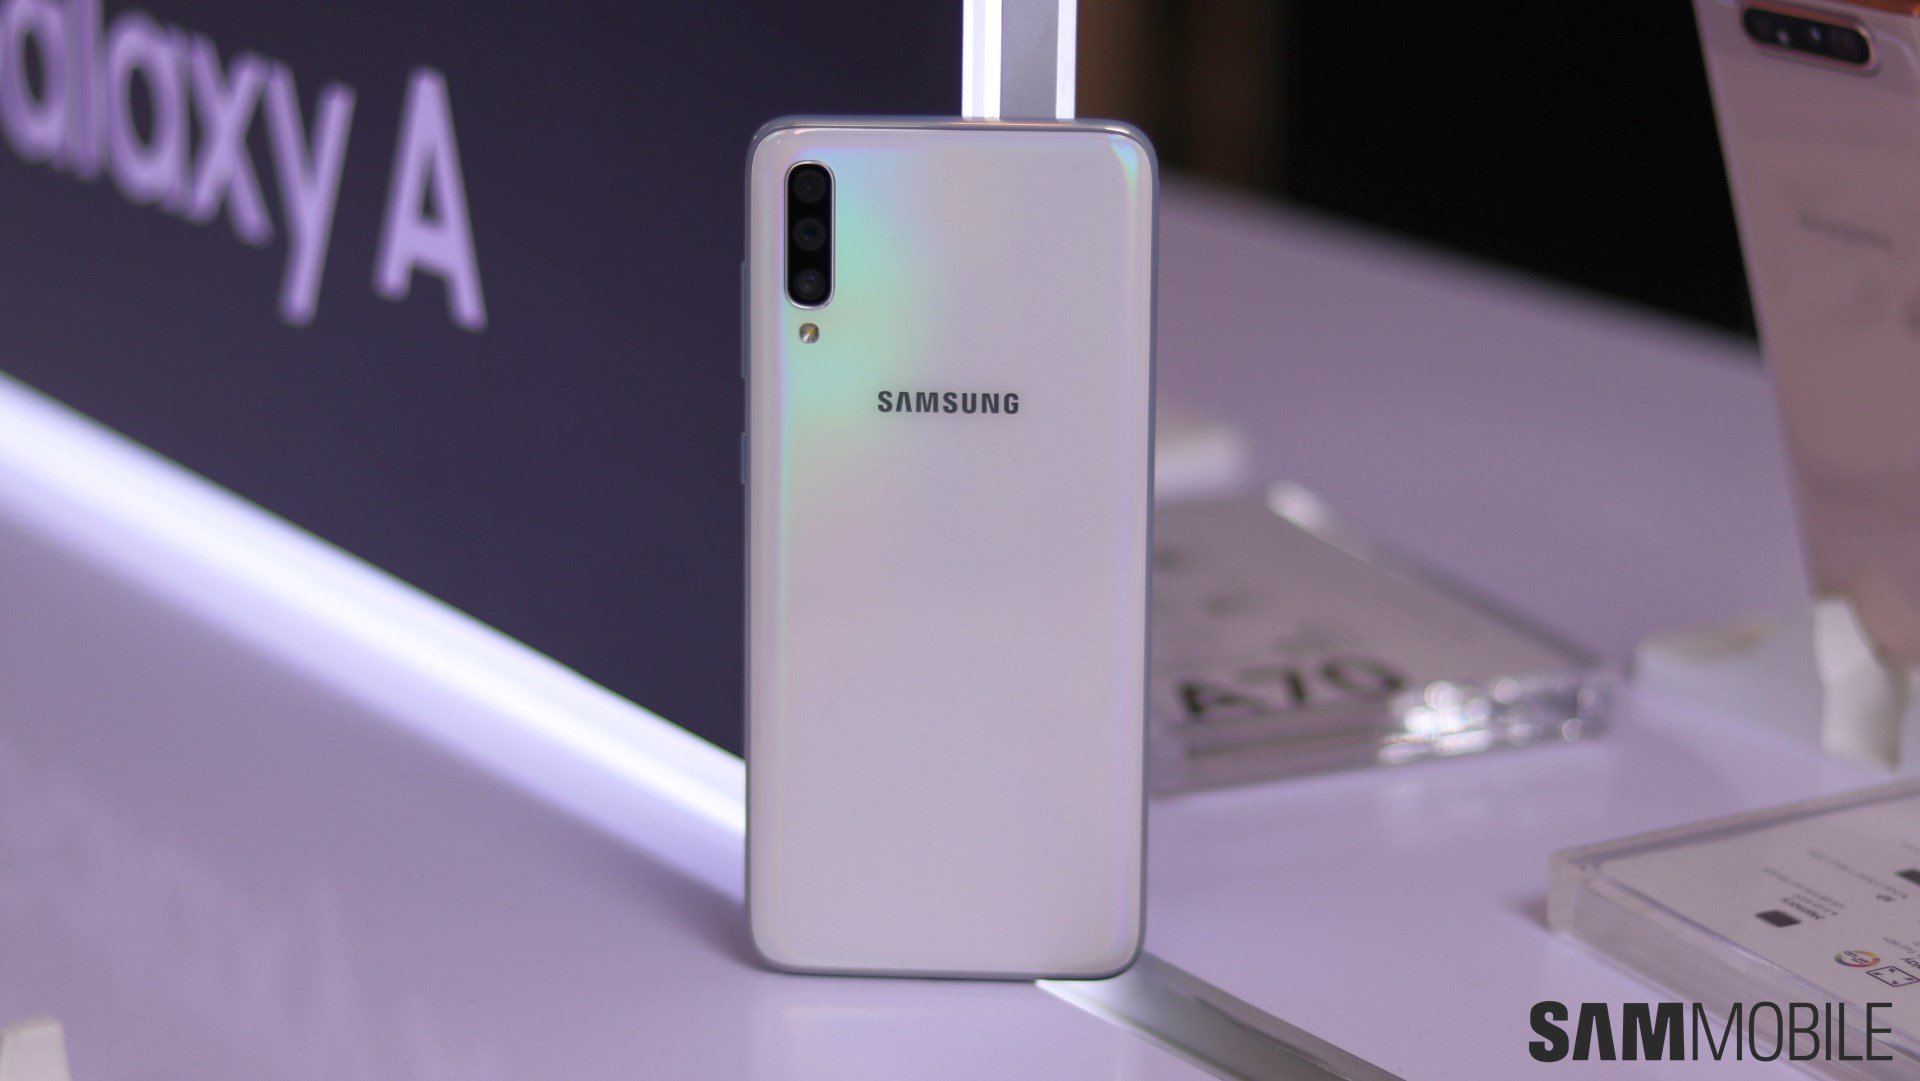 Galaxy A70s user manual reveals nothing of importance - SamMobile